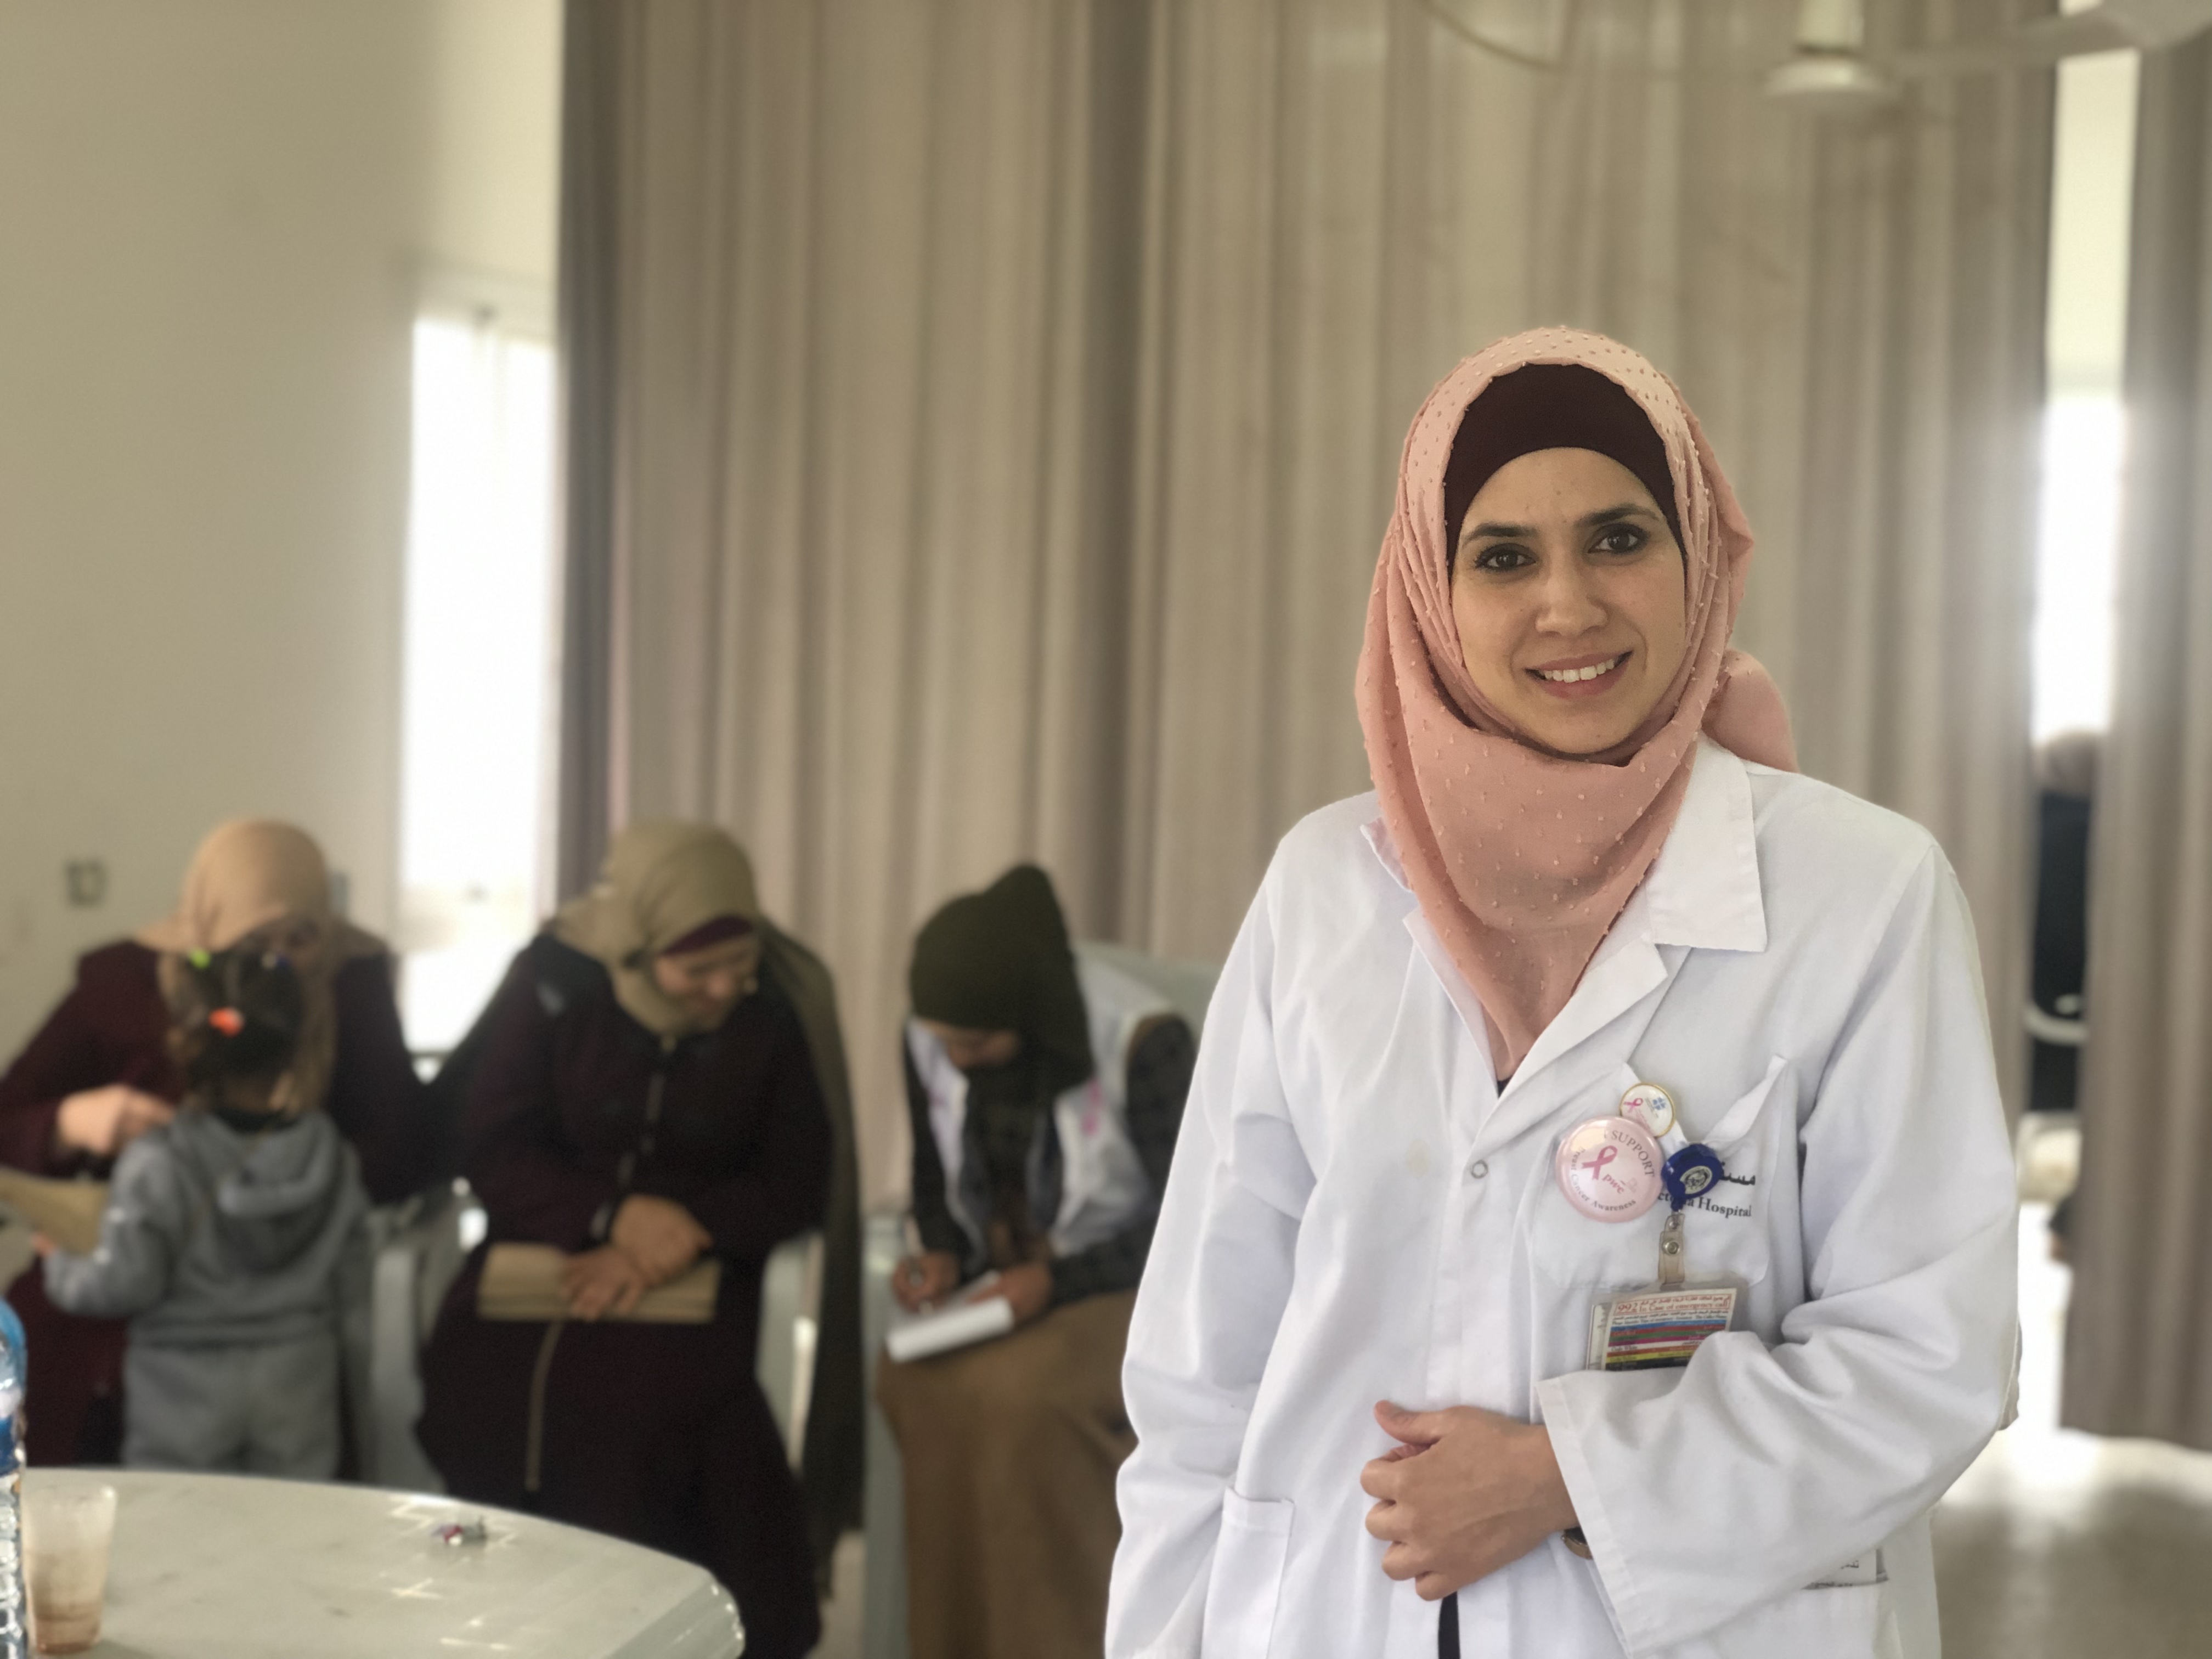 Murjan is a senior nurse with a mobile mammography clinic in the West Bank